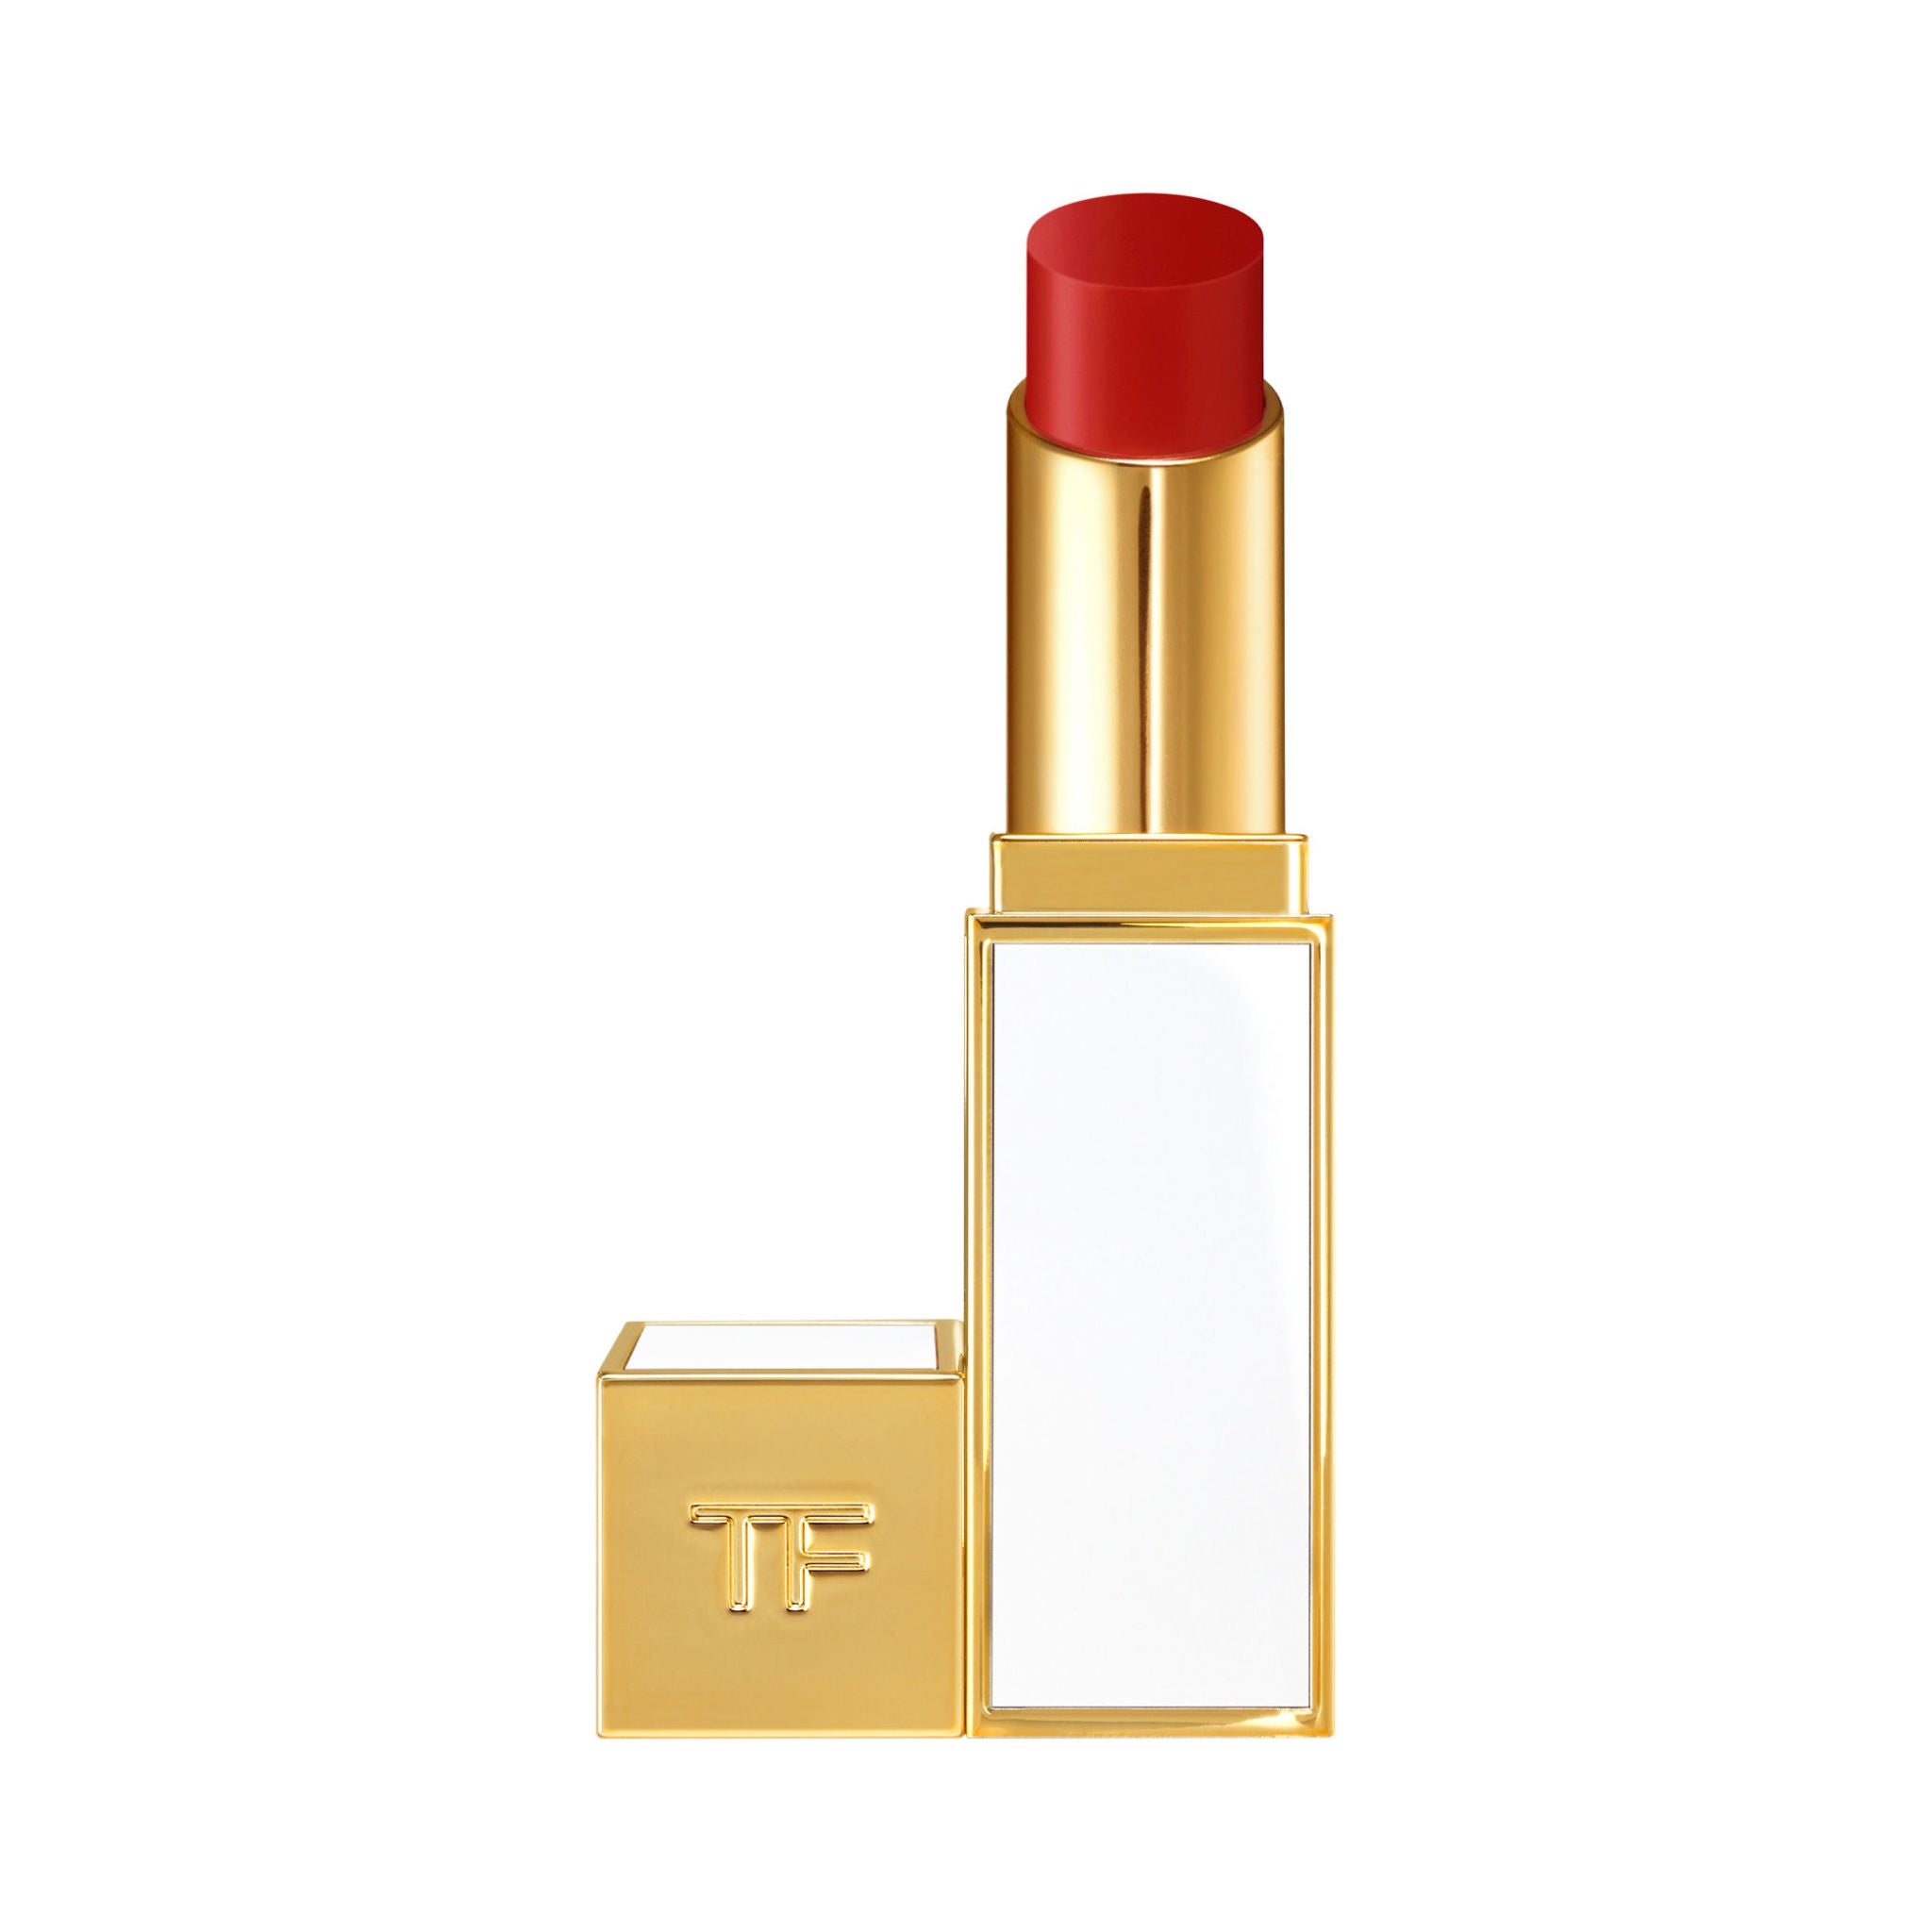 Tom Ford Ultra-Shine Lip Color (Limited Edition) Color/Shade variant: Île D'Amour main image.